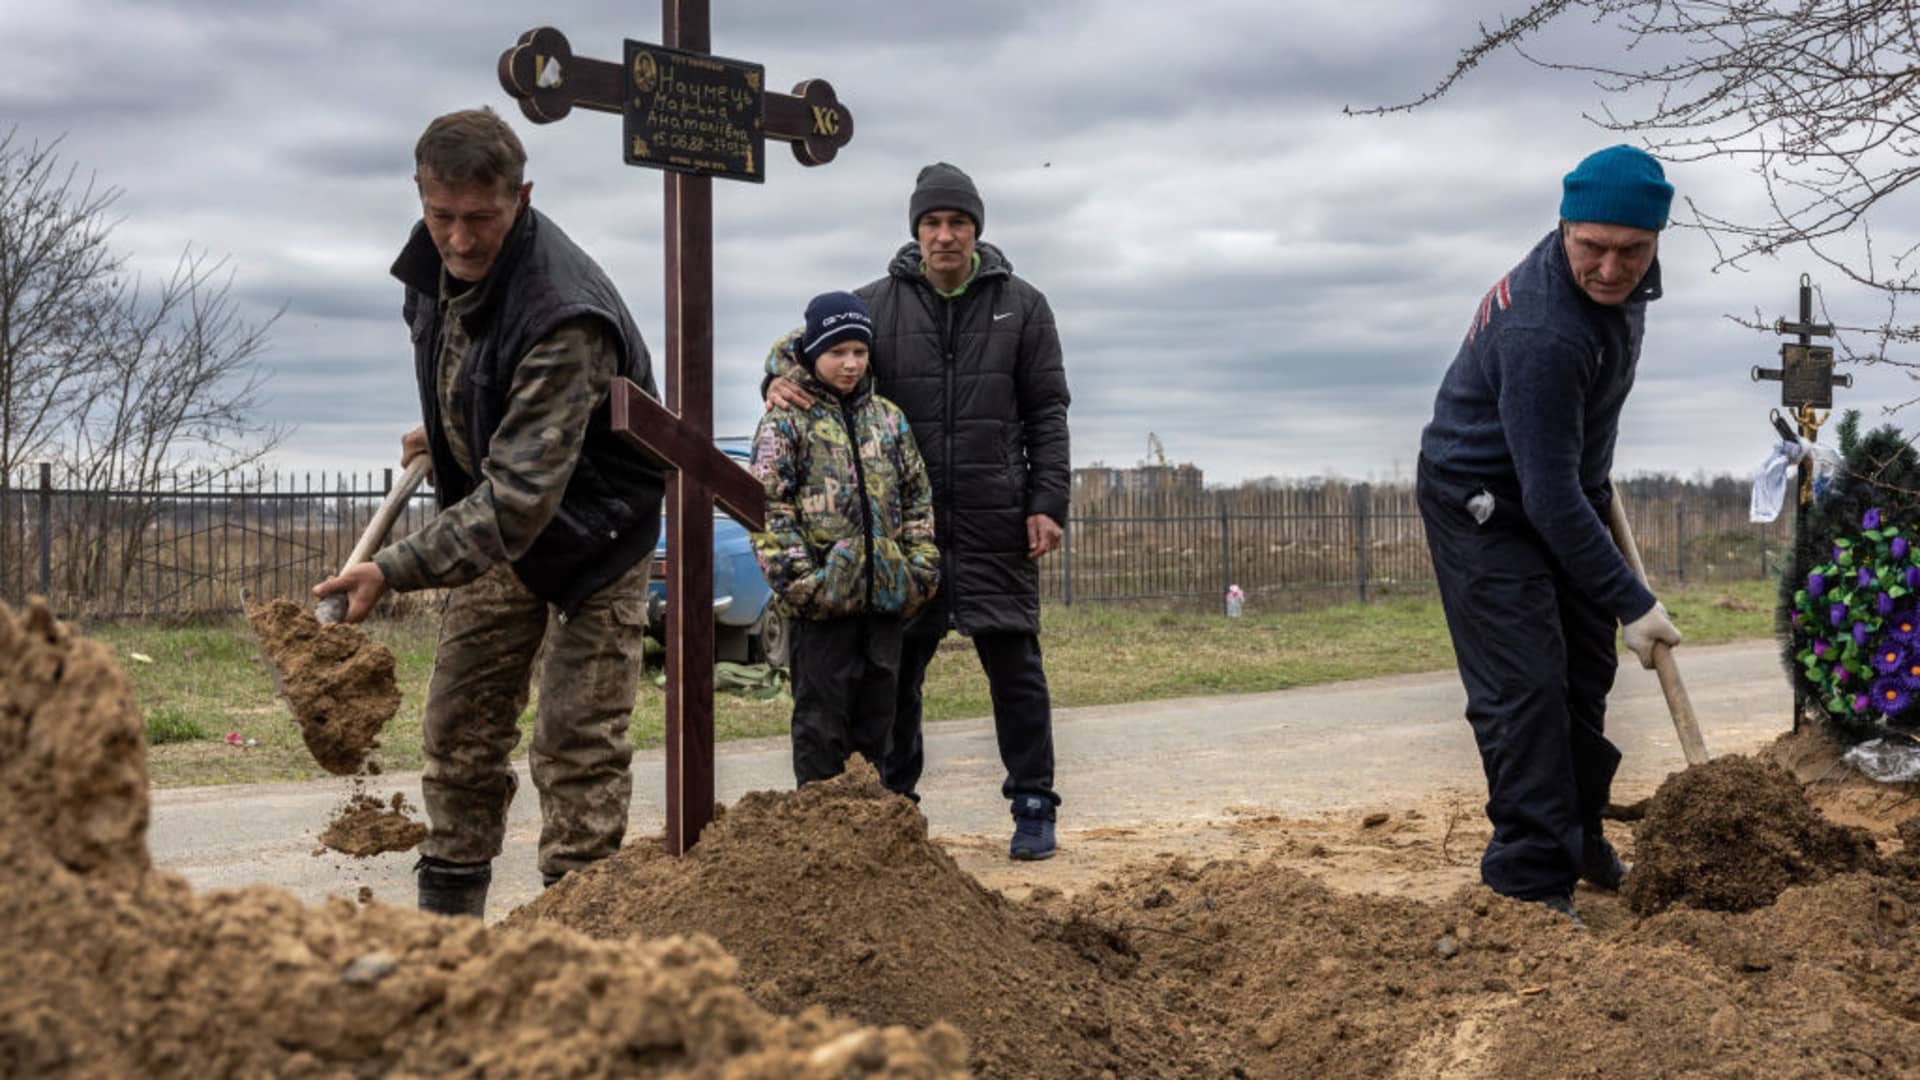 Grave diggers shovel soil into the grave of a woman as her husband and son watch on April 20, 2022 in Bucha, Ukraine.